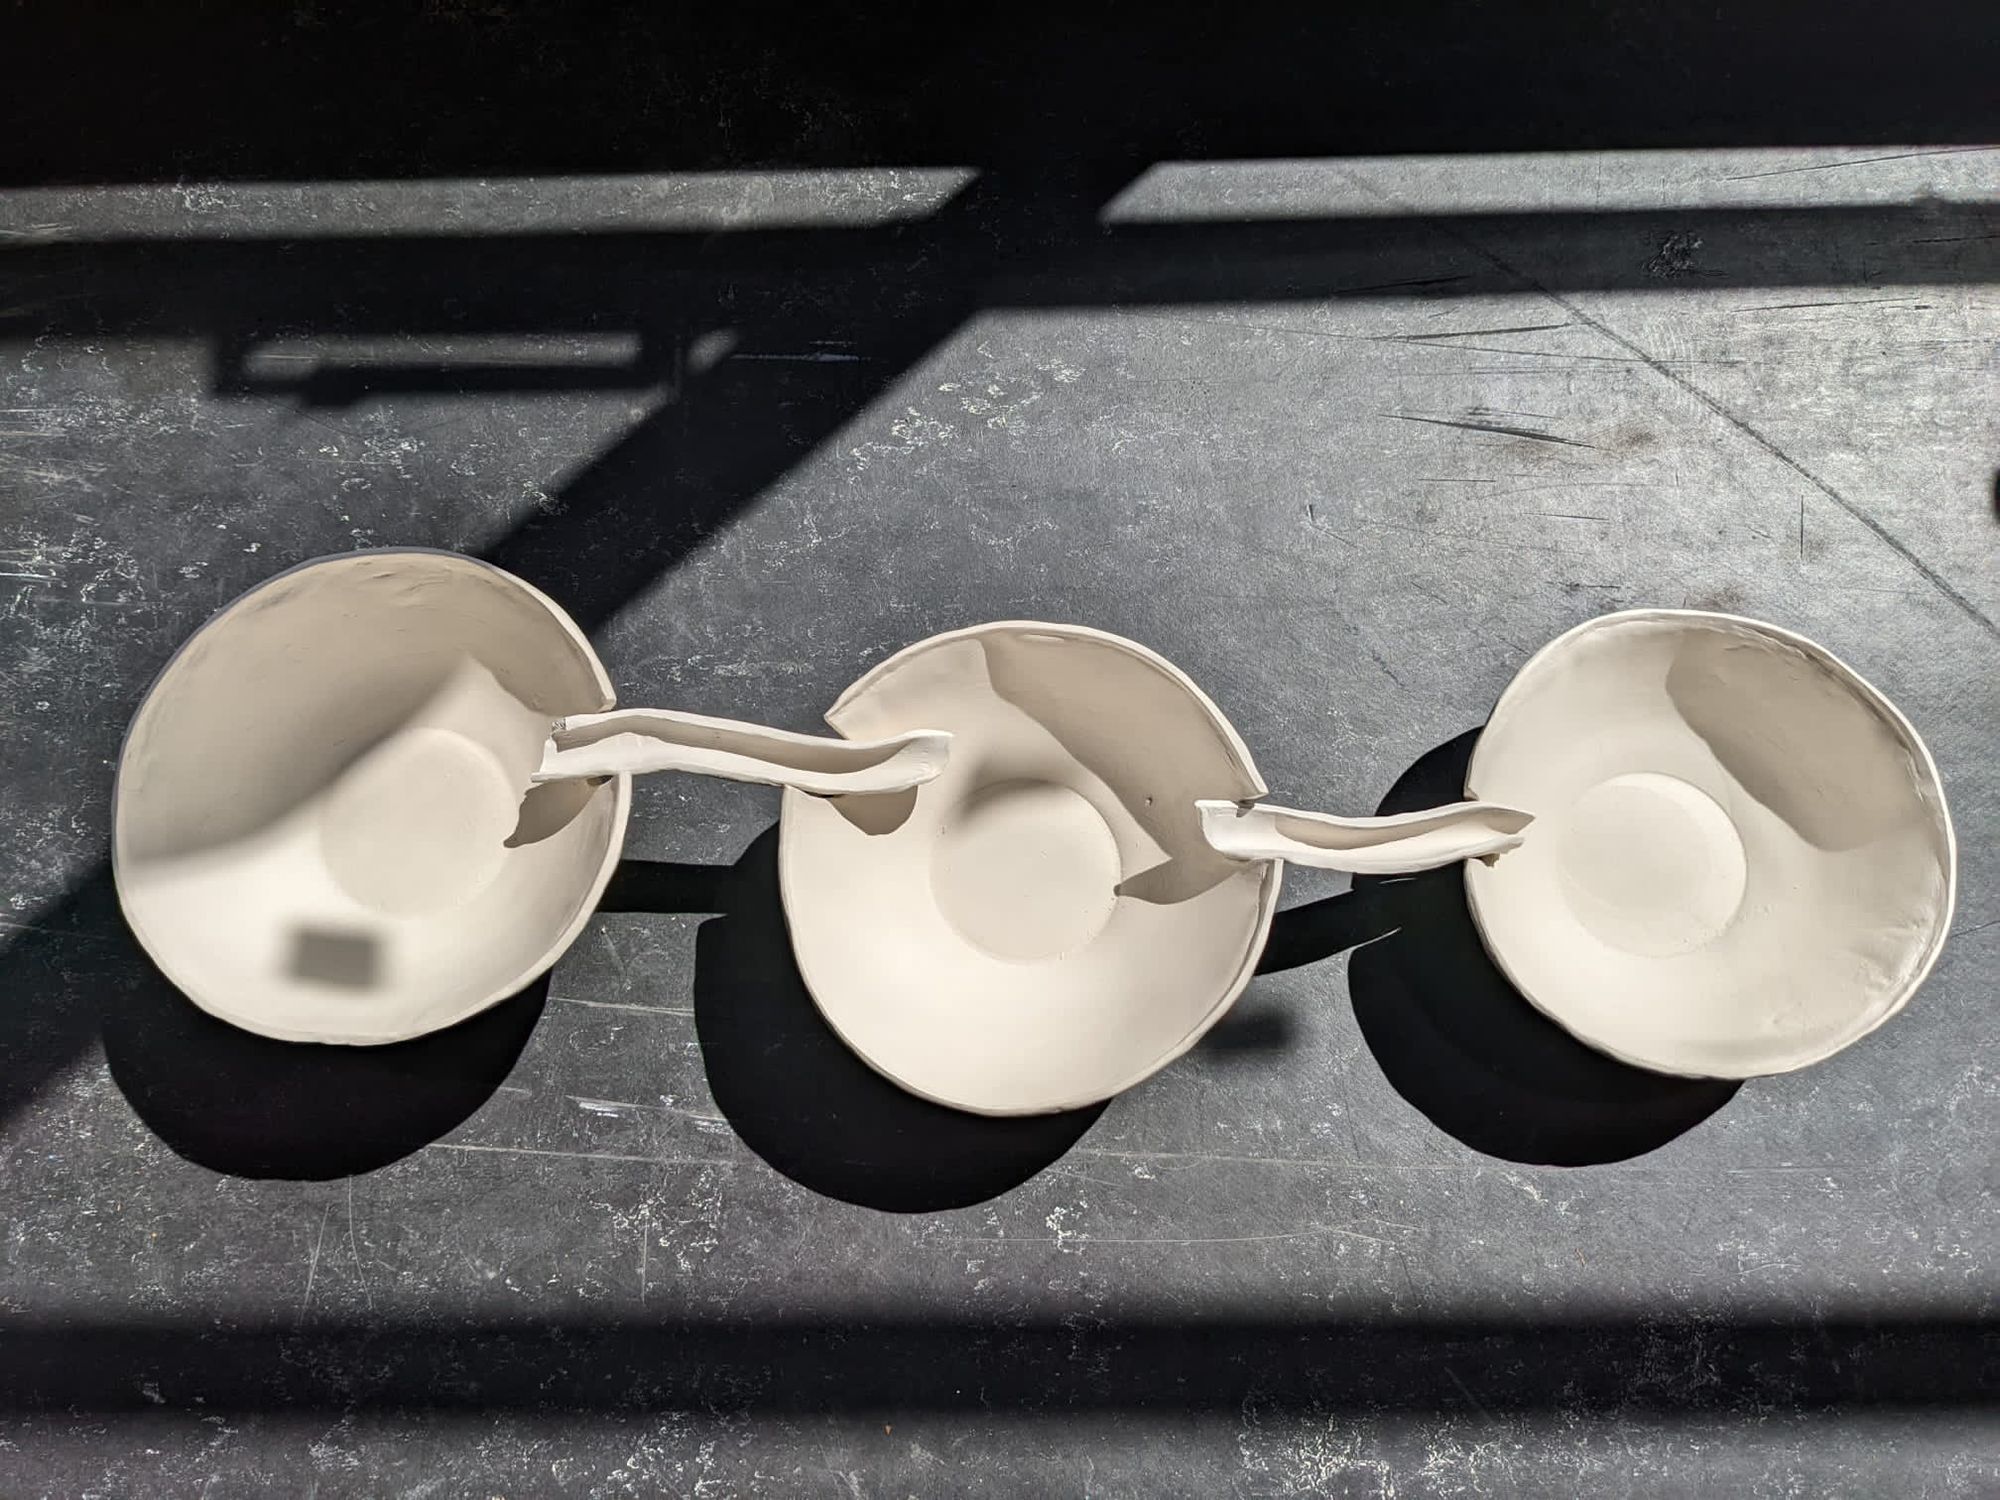 3 small bowls are interlinked with small creviced links. The image is a birds-eye view and sees them partially illuminated by slanting daylight.